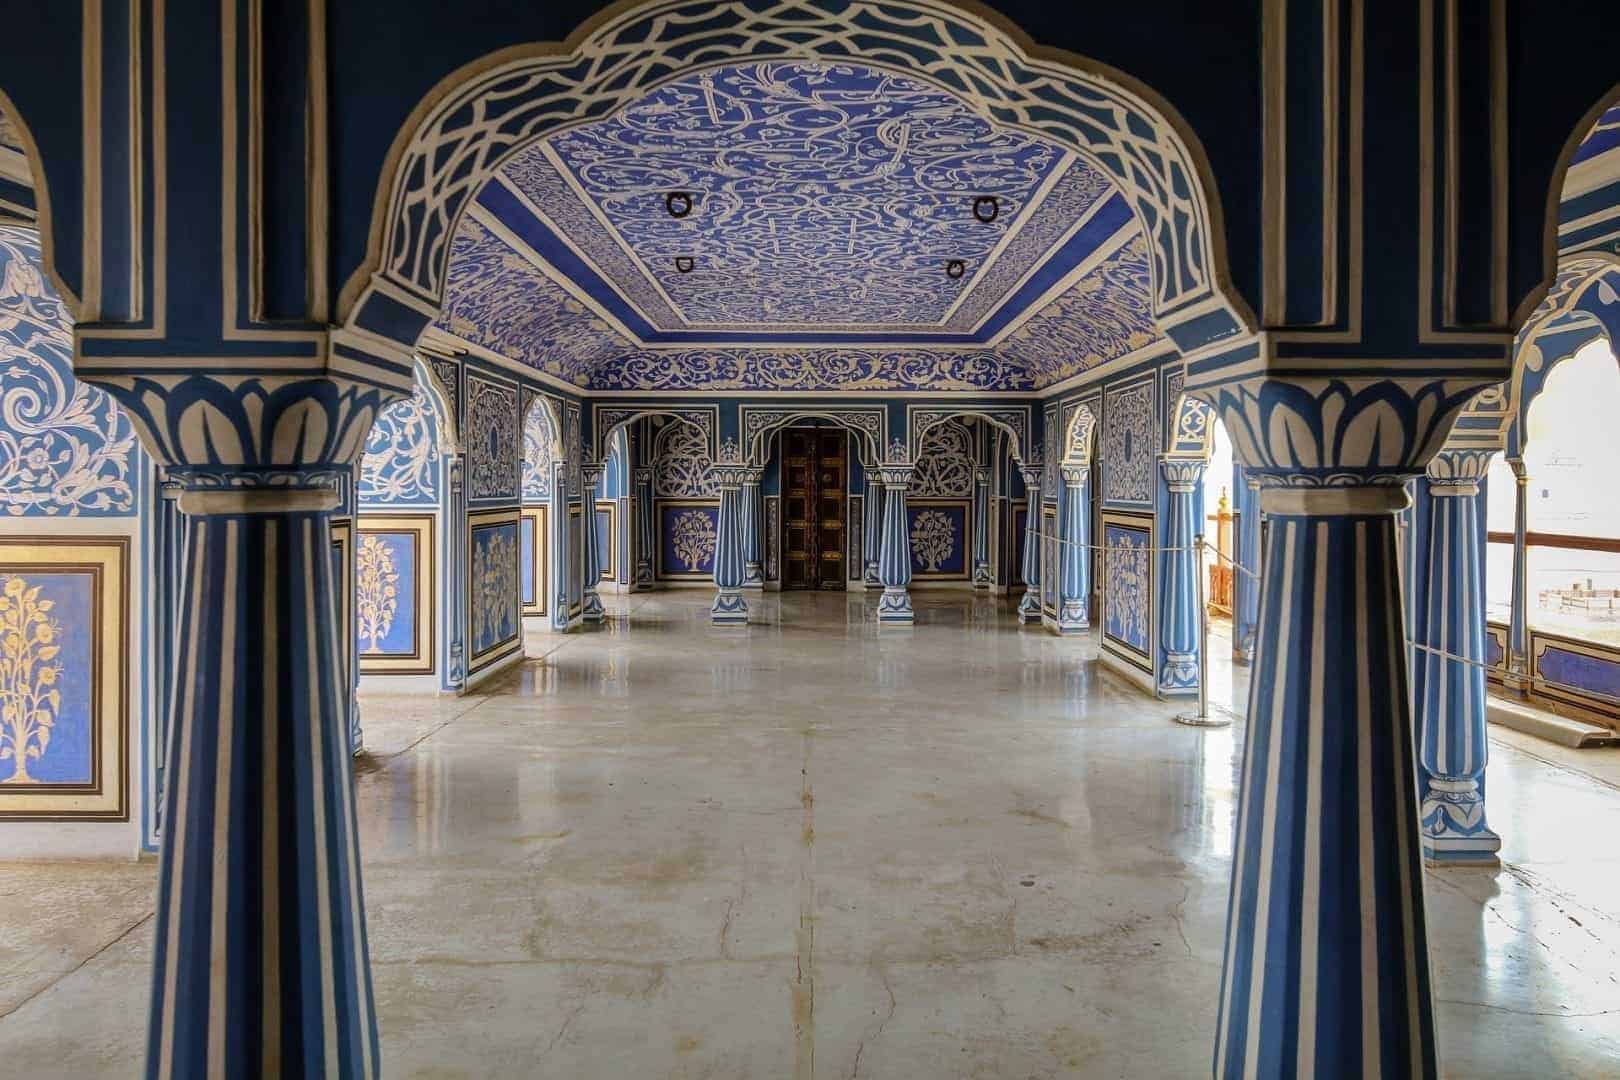 Jaipur two day itinerary